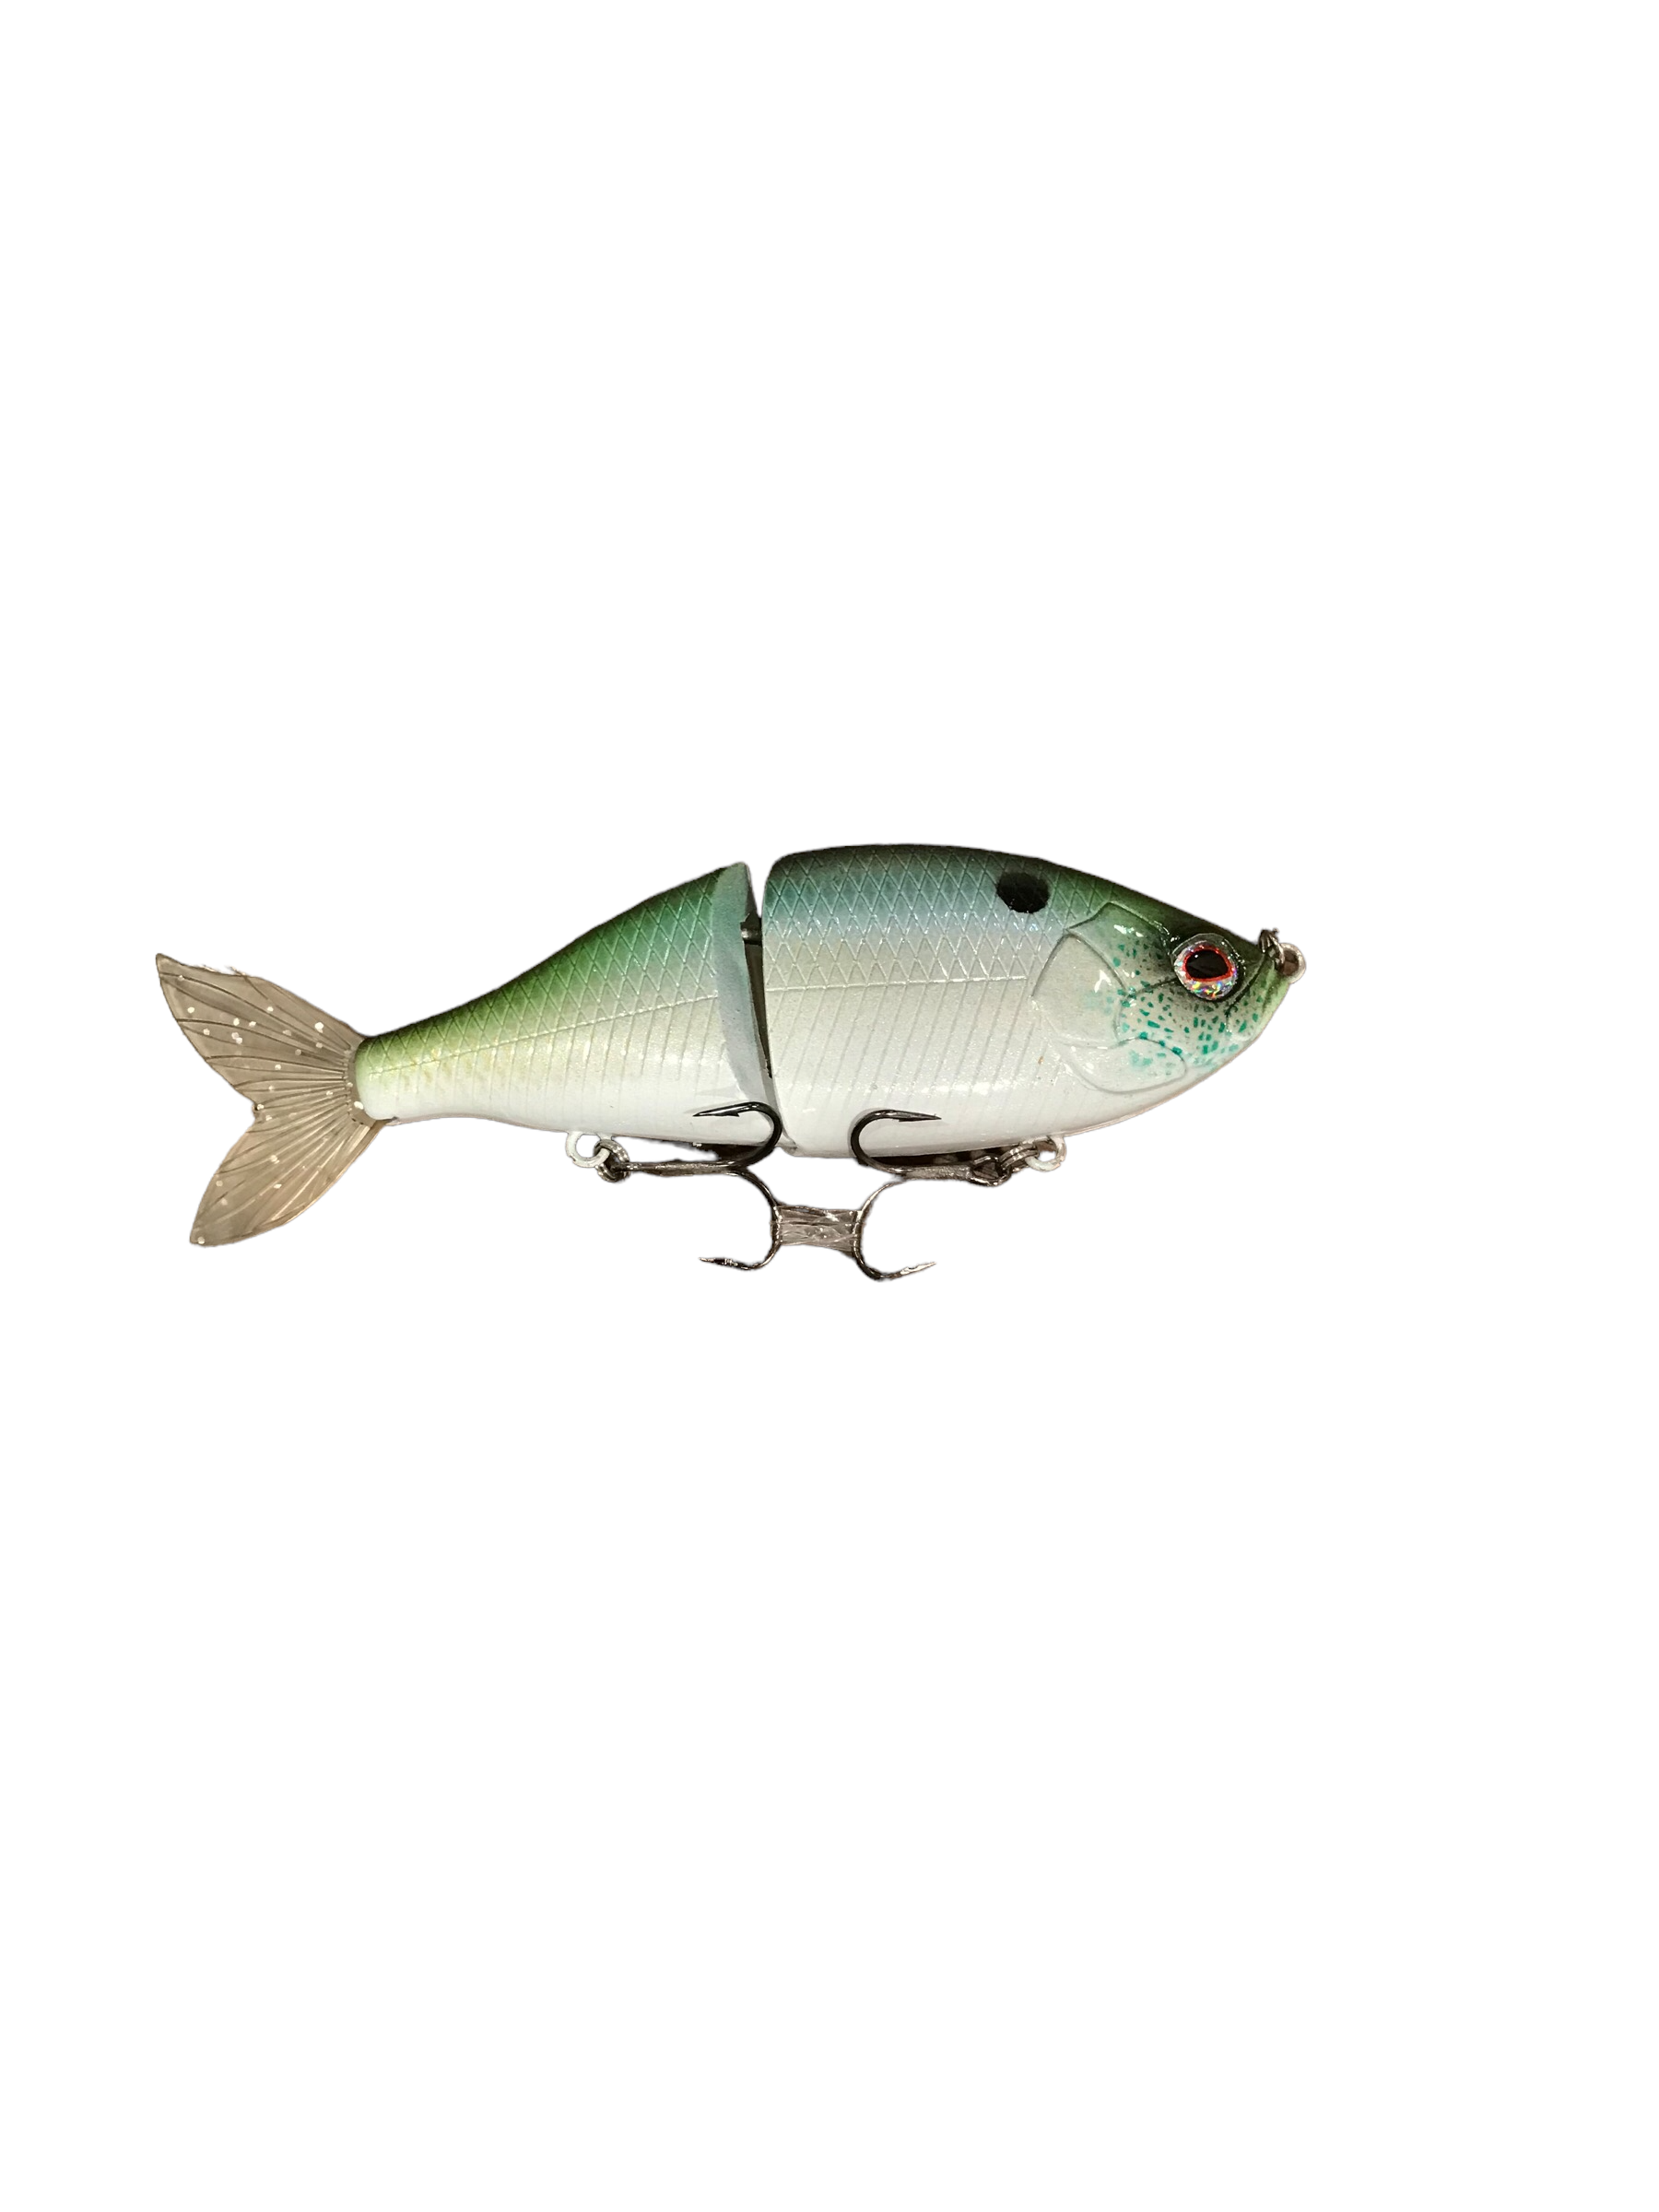 COUNTBASS 65mm 85mm 100mm Walking Baits Topwater Fishing Lures